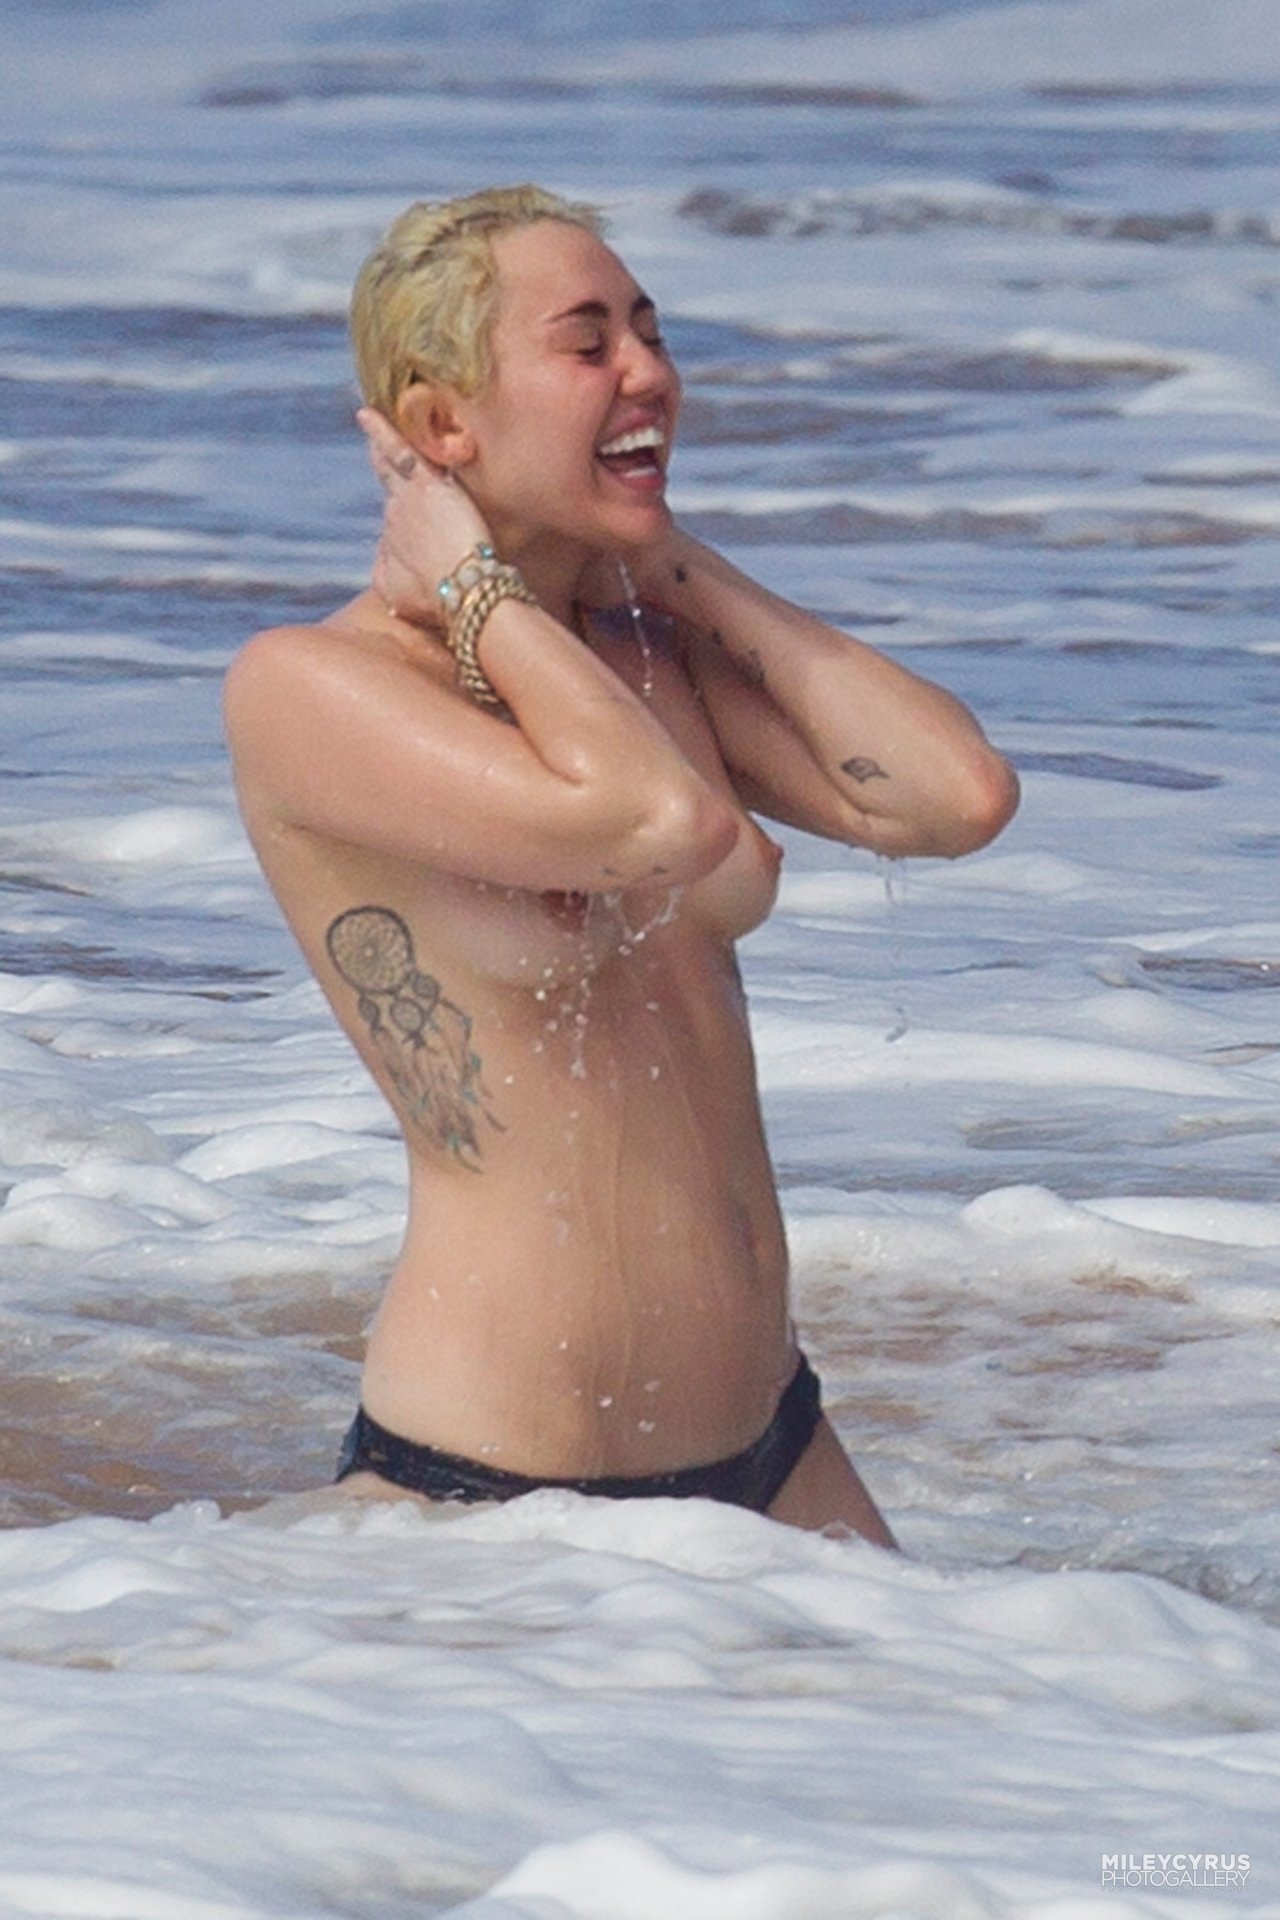 Miley cyrus topless on horse